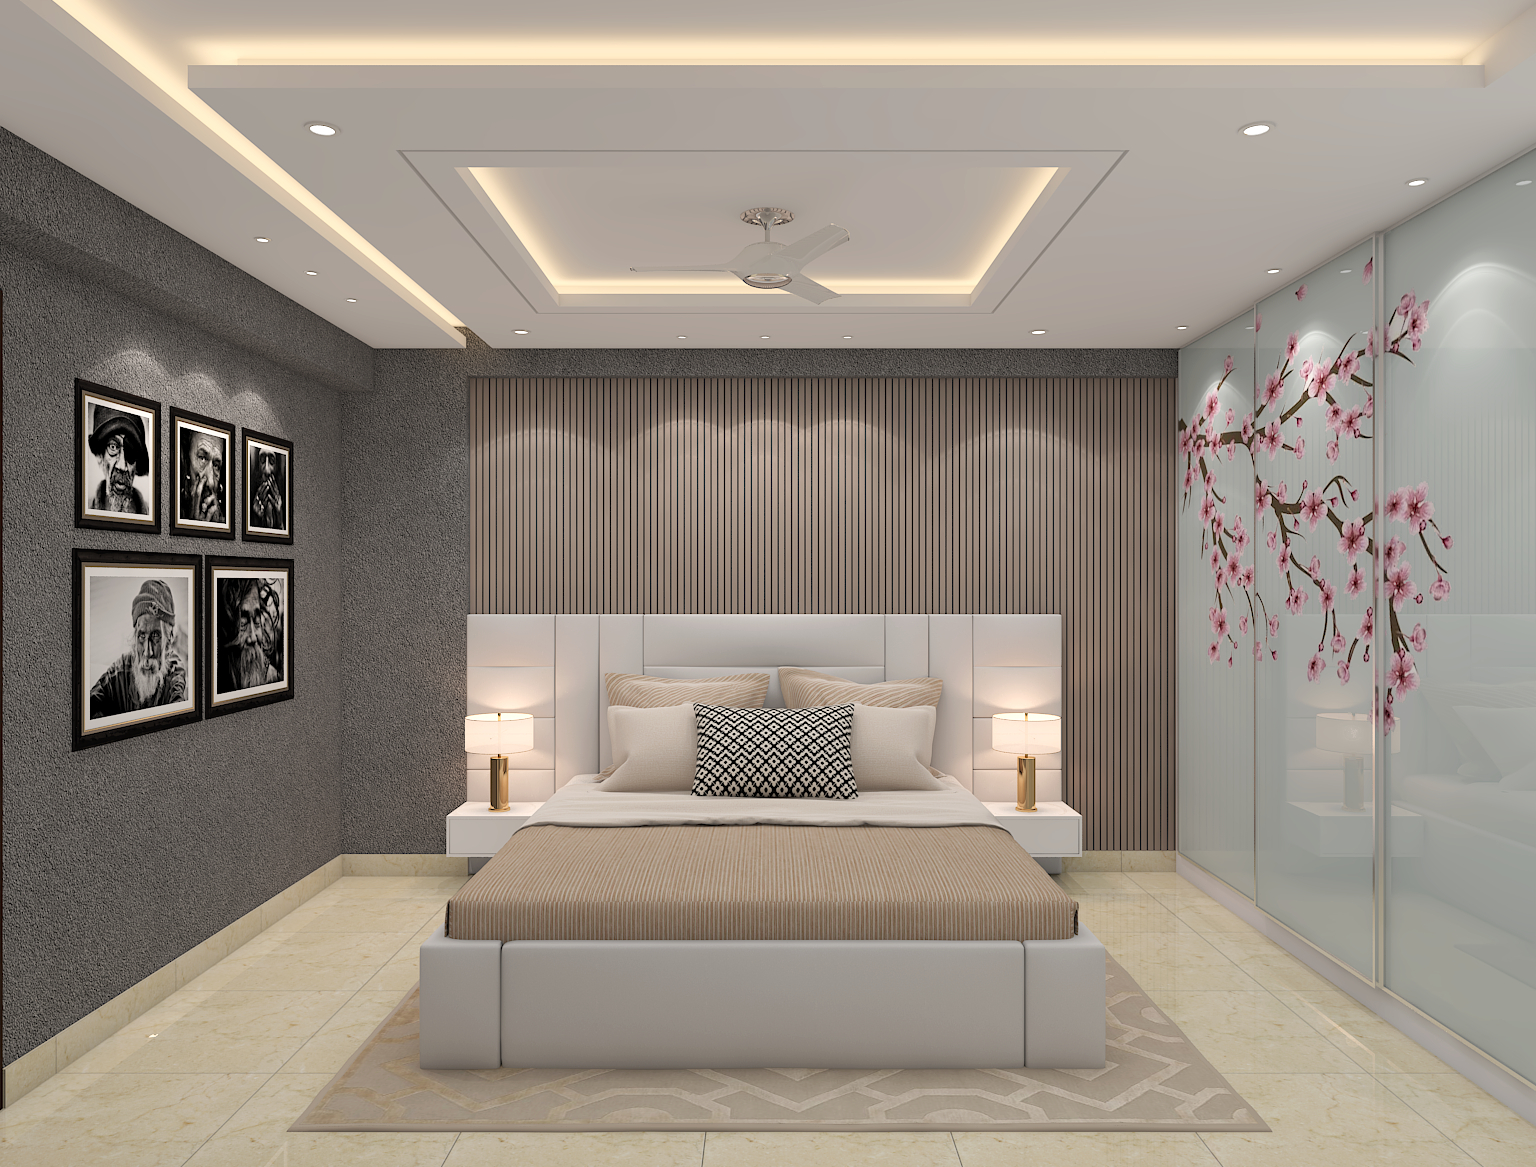 Design Styles for a Dreamy Bedroom